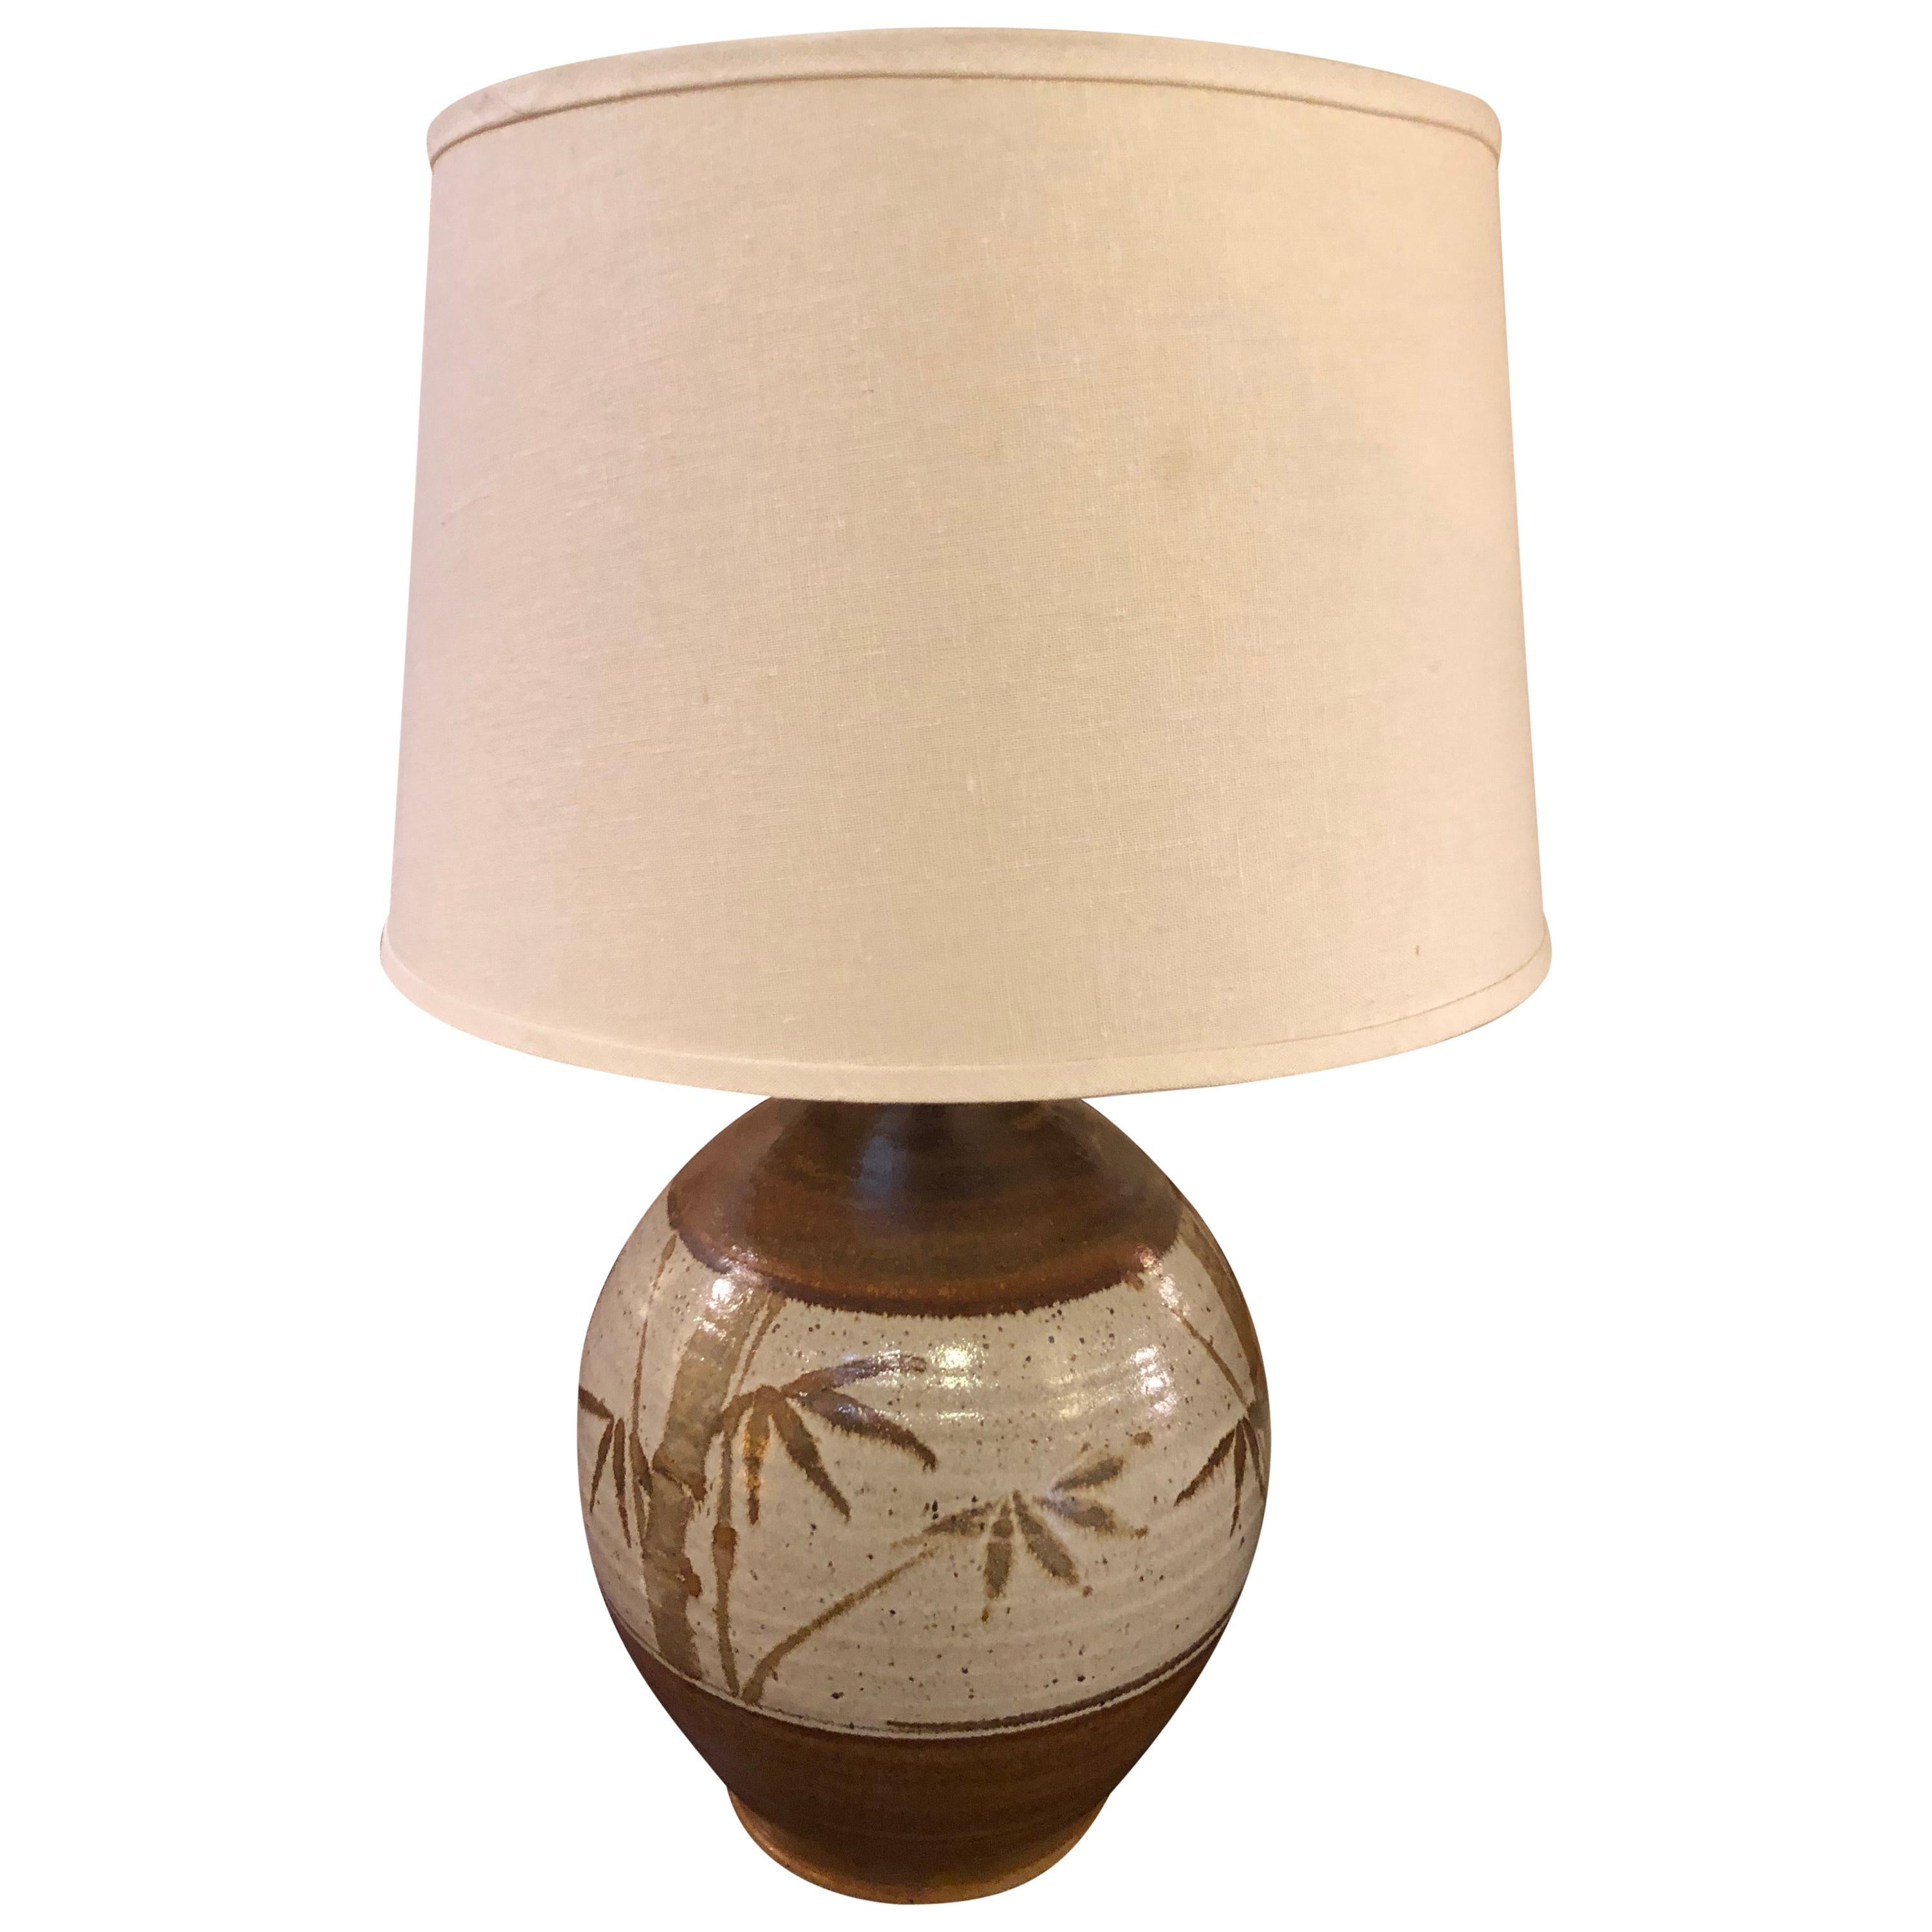 Ceramic Bamboo Table Lamp with Shade